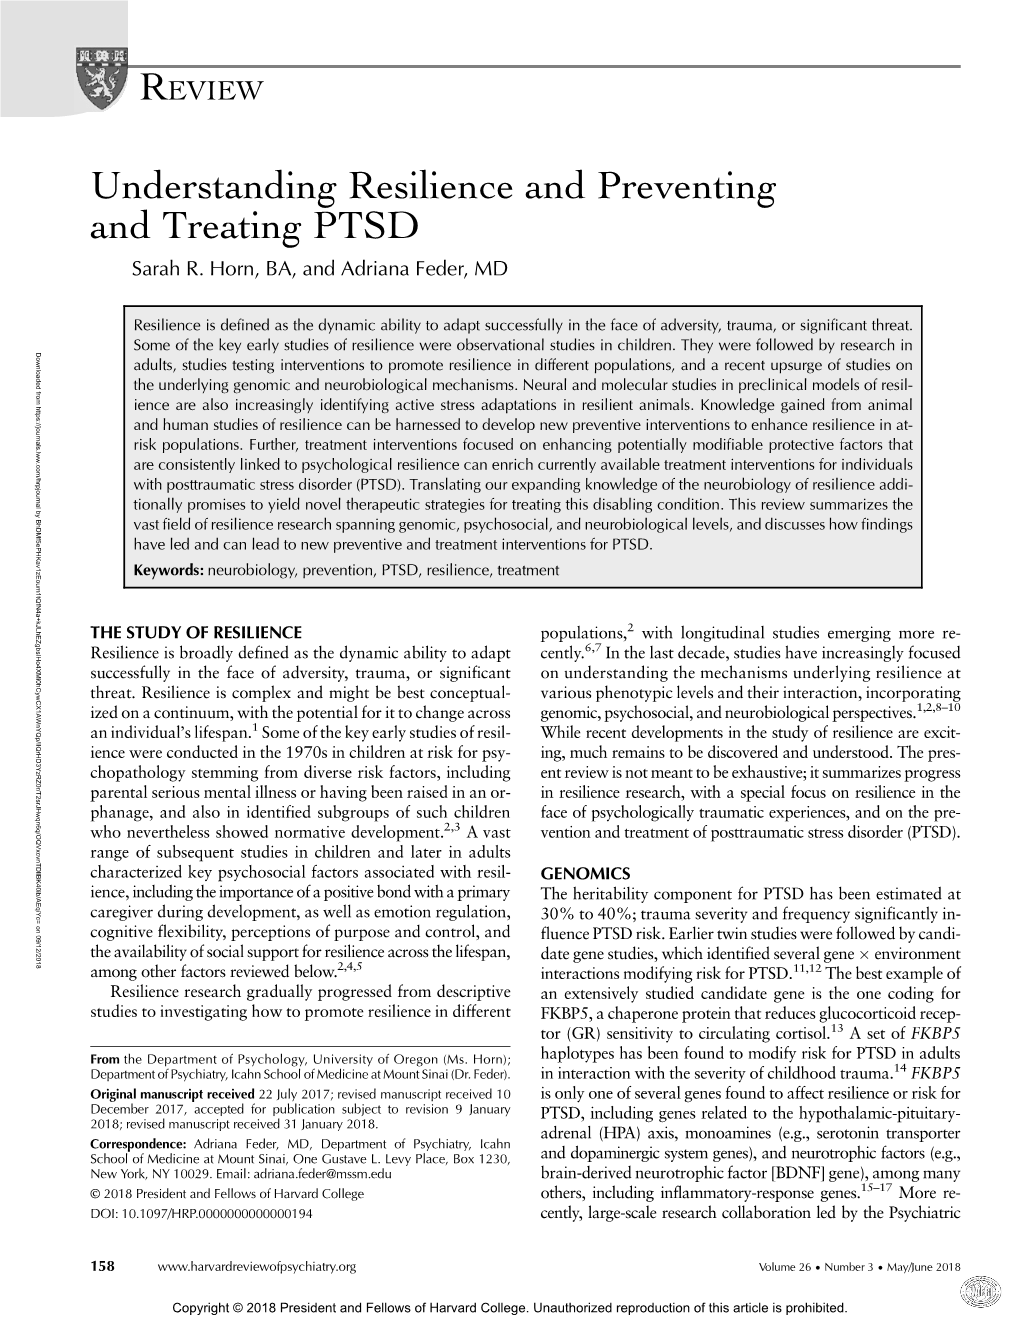 Understanding Resilience and Preventing and Treating PTSD